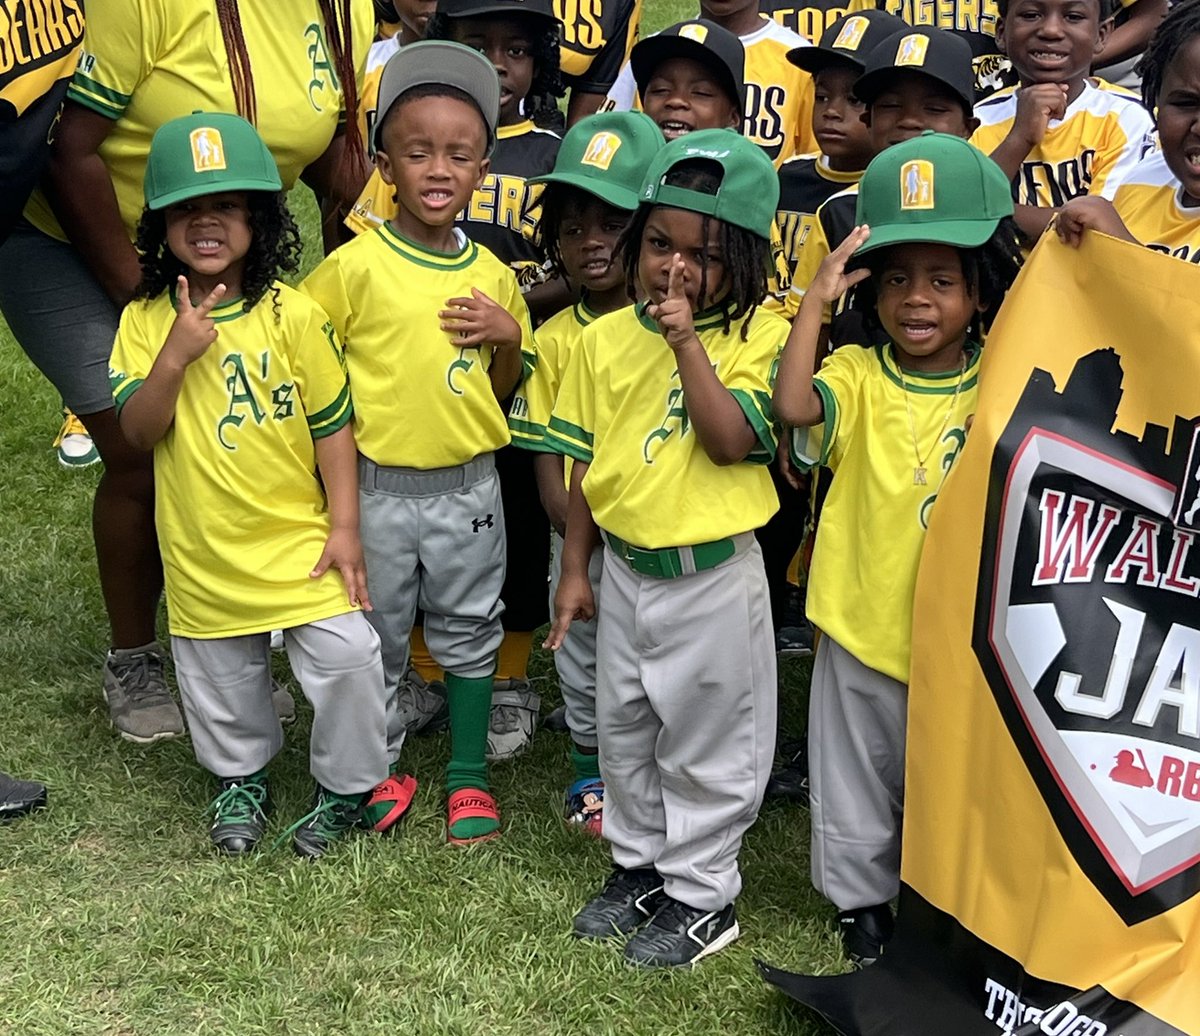 Kids love uniforms. If you played youth league, you remember when your uni was issued, racing home, trying it on. Man, the pride on these faces. Wearing unis they otherwise couldn’t. Corny maybe, but THAT gives me joy. Thanks to all who donate. @WalkOffJax